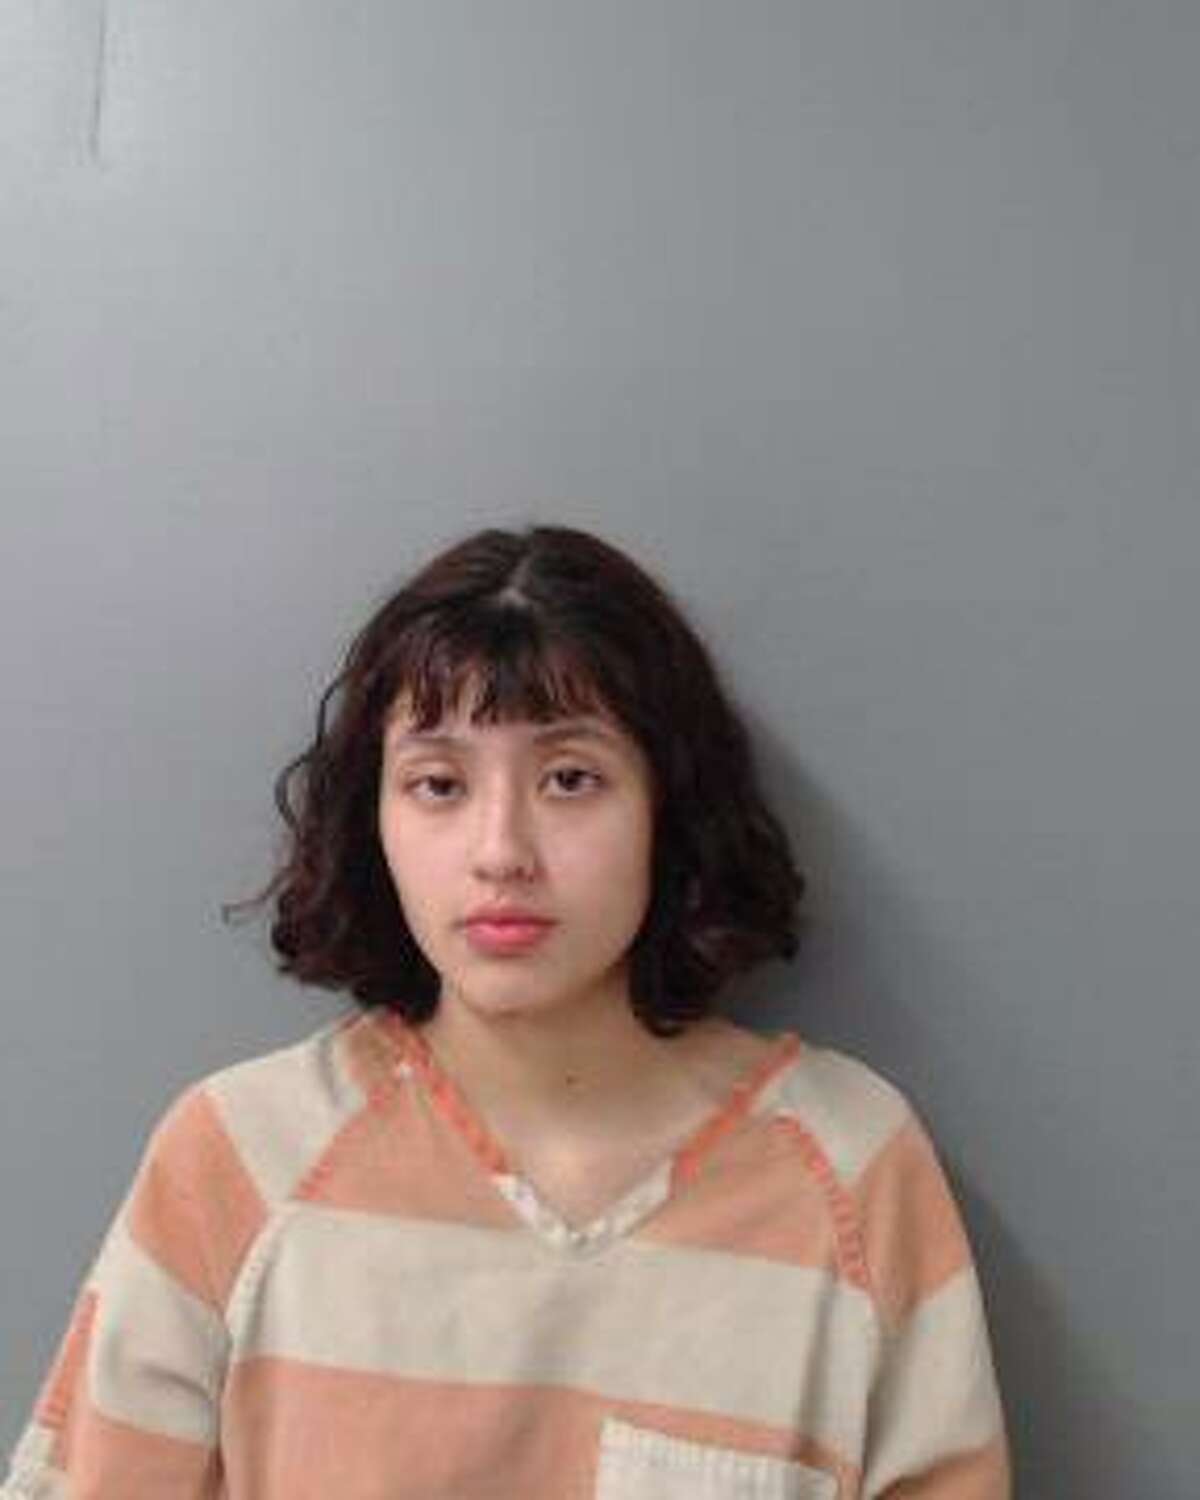 Jamie Abigail Castro, 18, was arrested on May 29, 2022 in Laredo for allegedly crashing her car while intoxicated and fleeing the scene.